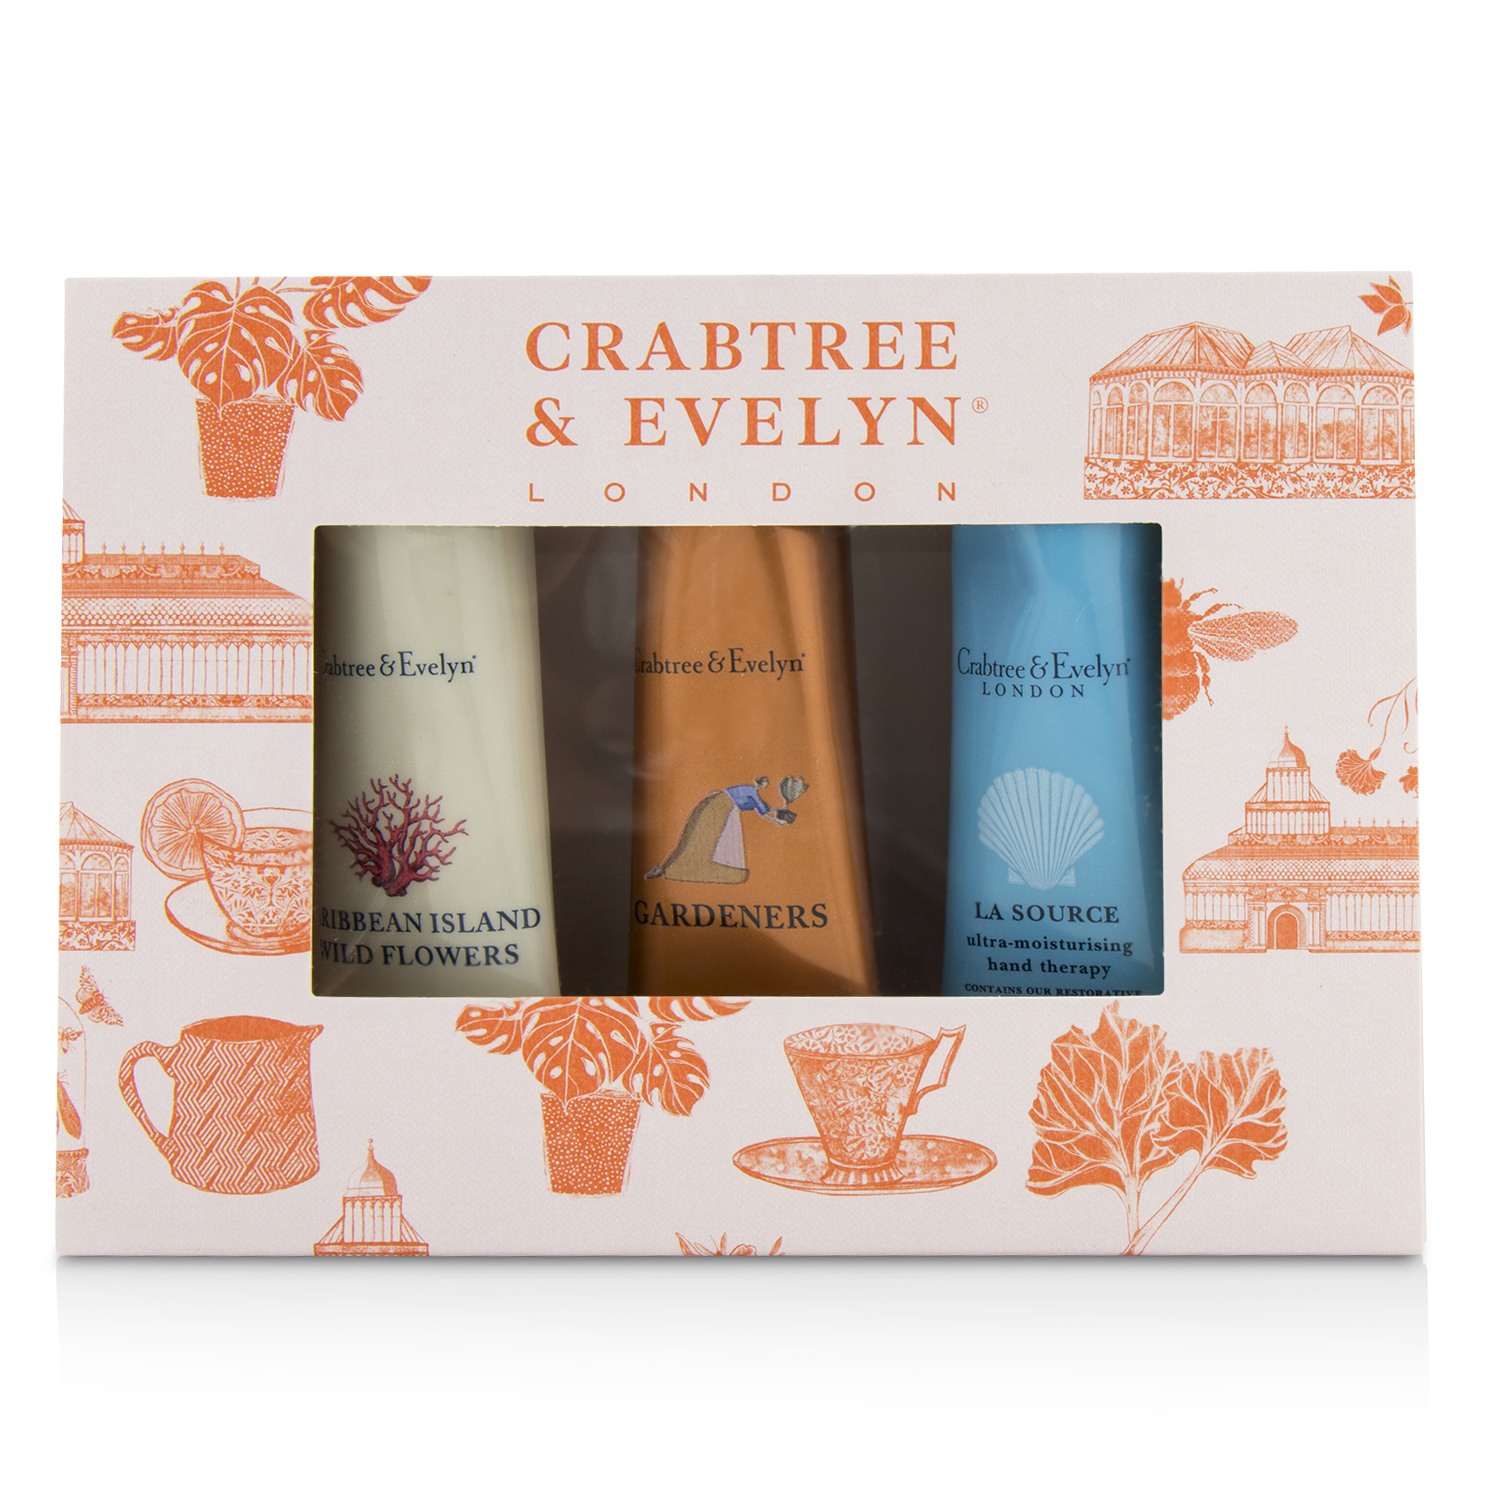 Bestsellers Hand Therapy Set (1x Caribbean Island Wild Flowers 1x Gardeners 1x La Source) Crabtree & Evelyn Image